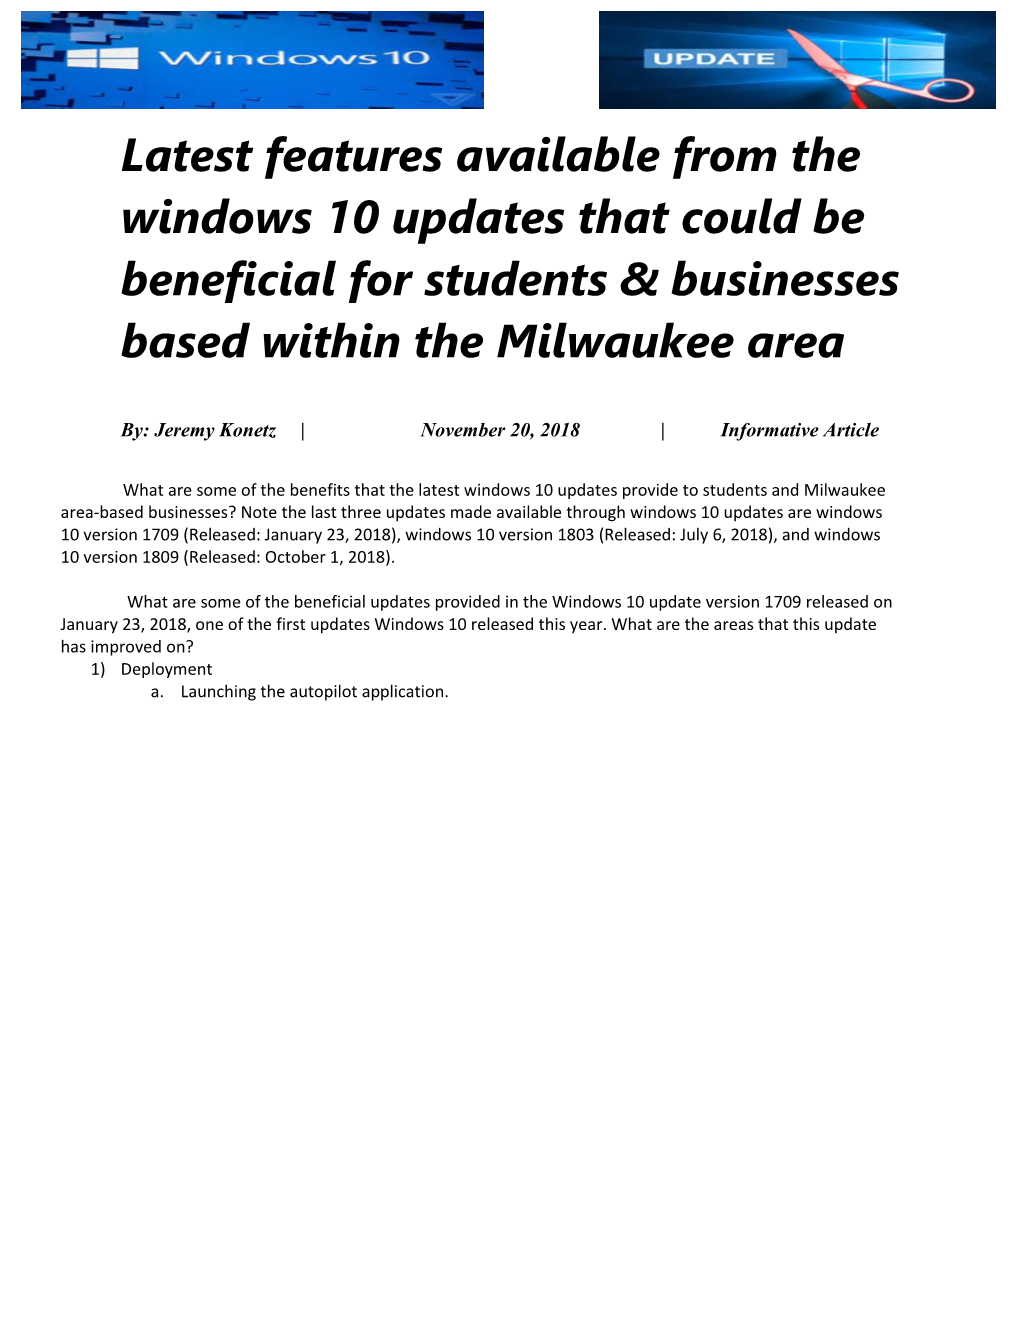 Latest Features Available from the Windows 10 Updates That Could Be Beneficial for Students & Businesses Based Within the Milwaukee Area